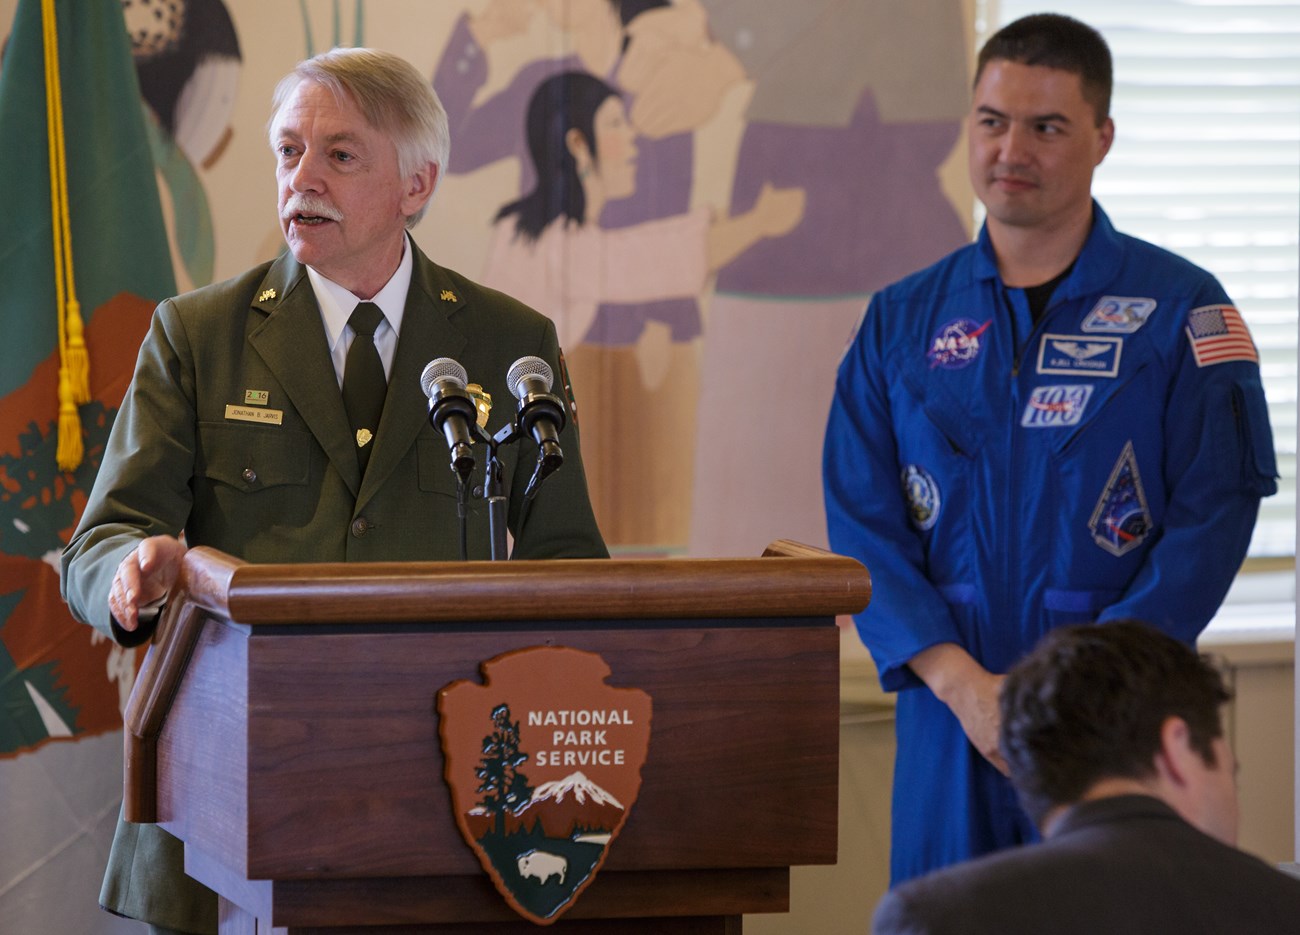 Director Jarvis in his NPS uniforms stands at a podium as Astronaut Kjell Lindgren, in a blue flight suit, looks on.